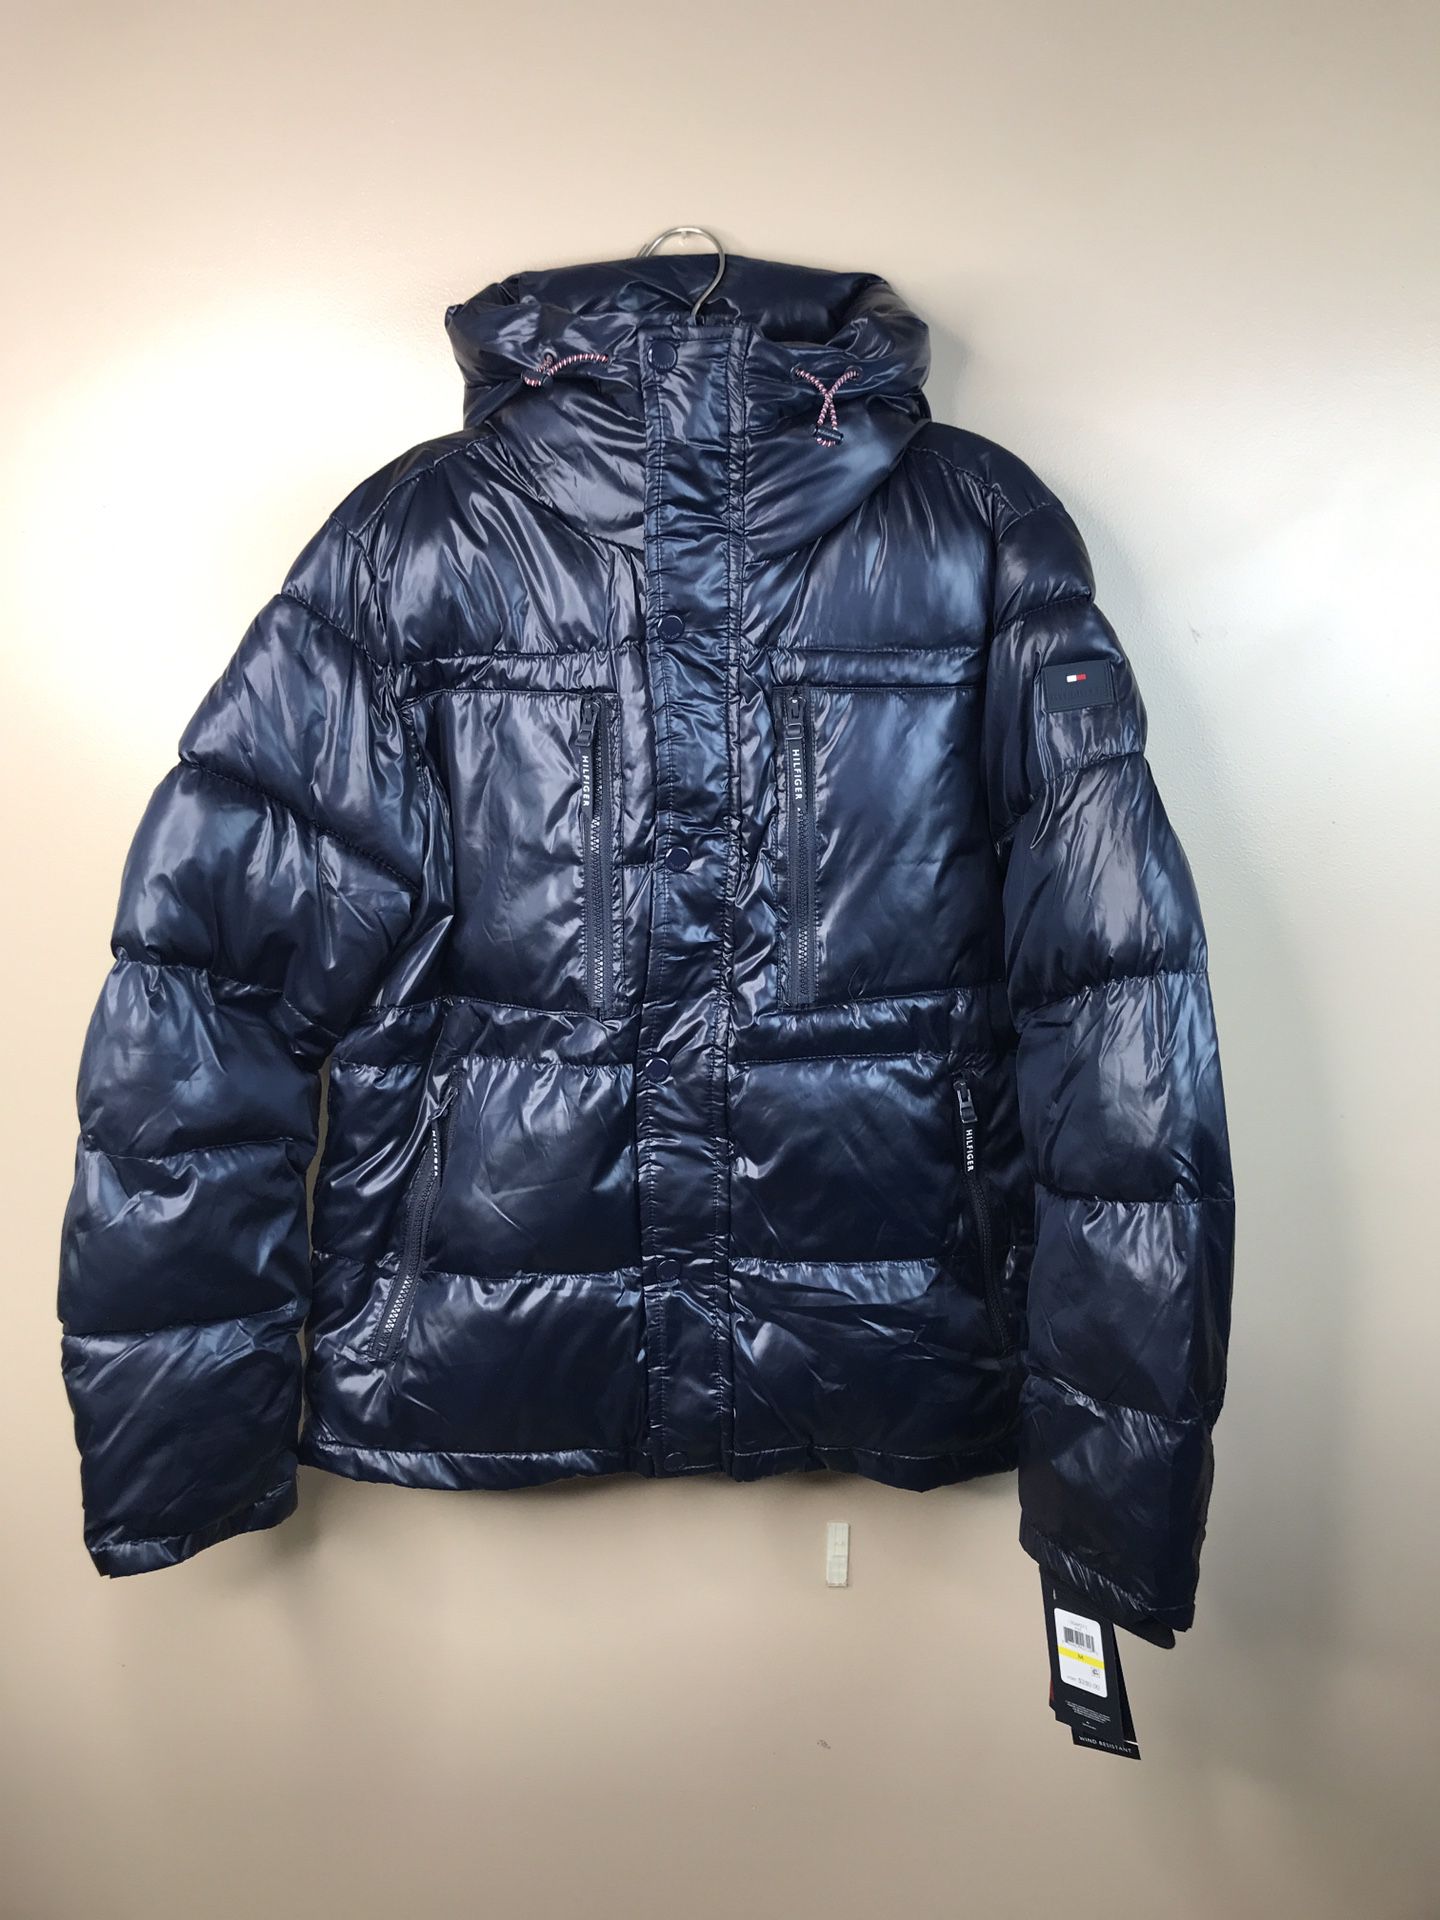 NWT Tommy Hilfiger Men's Navy Pearlized Performance Hooded Puffer Jacket $250.